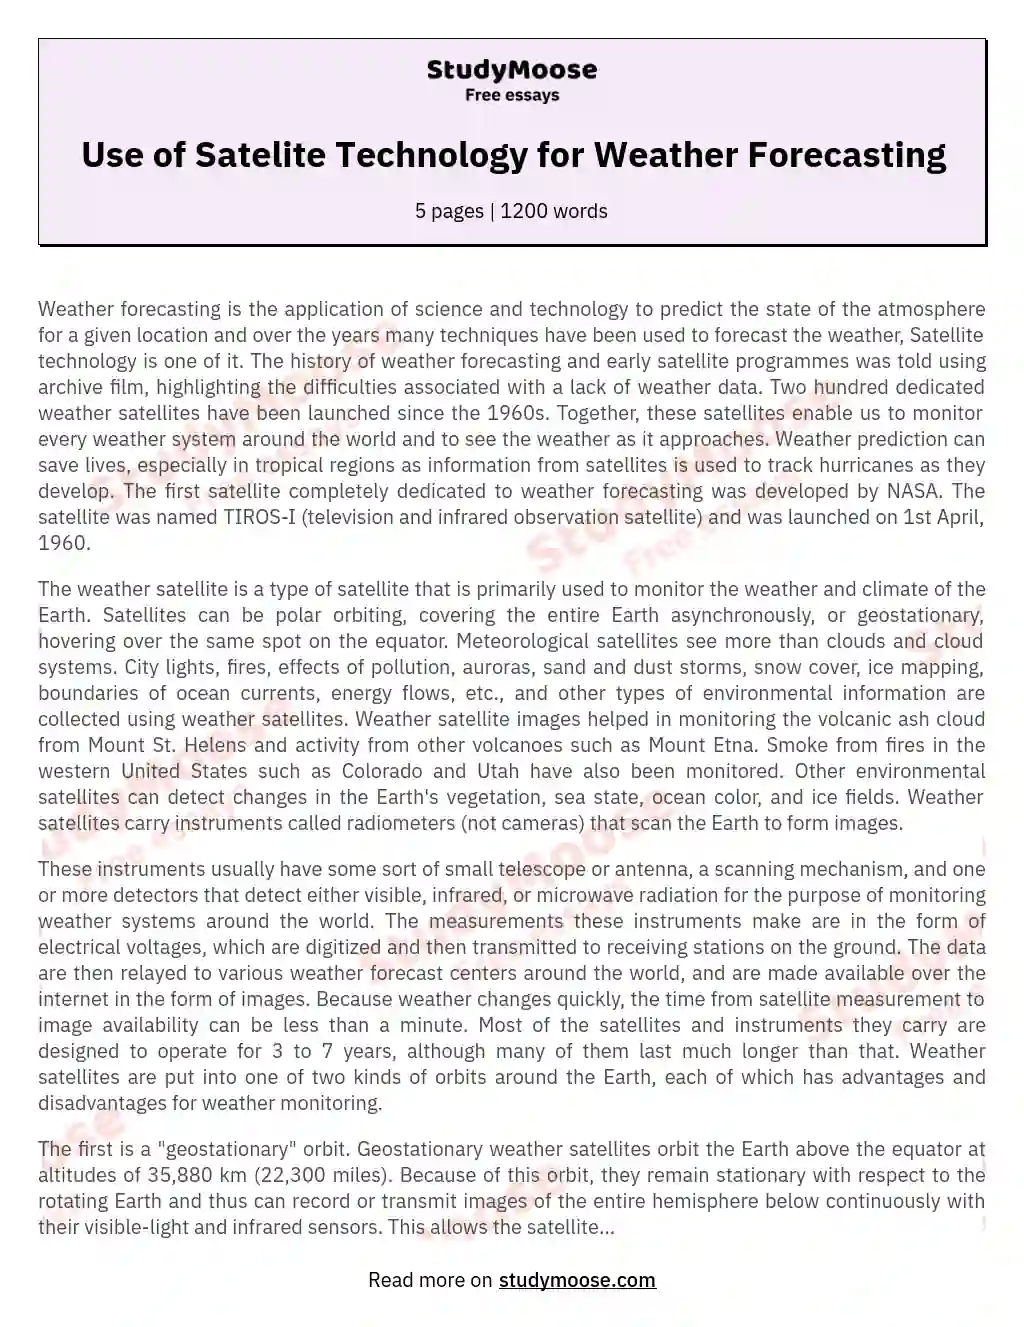 Use of Satelite Technology for Weather Forecasting essay